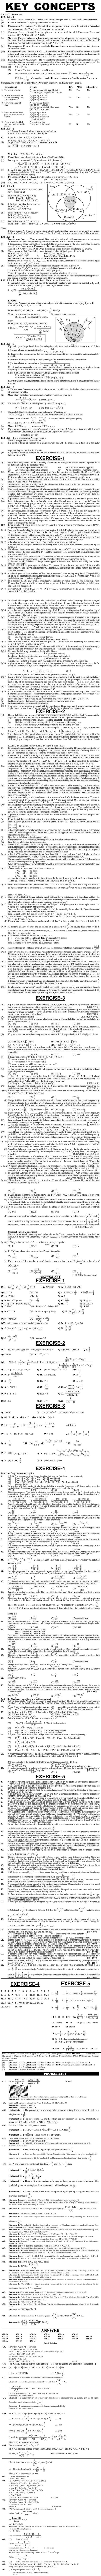 Maths Study Material - Chapter 6